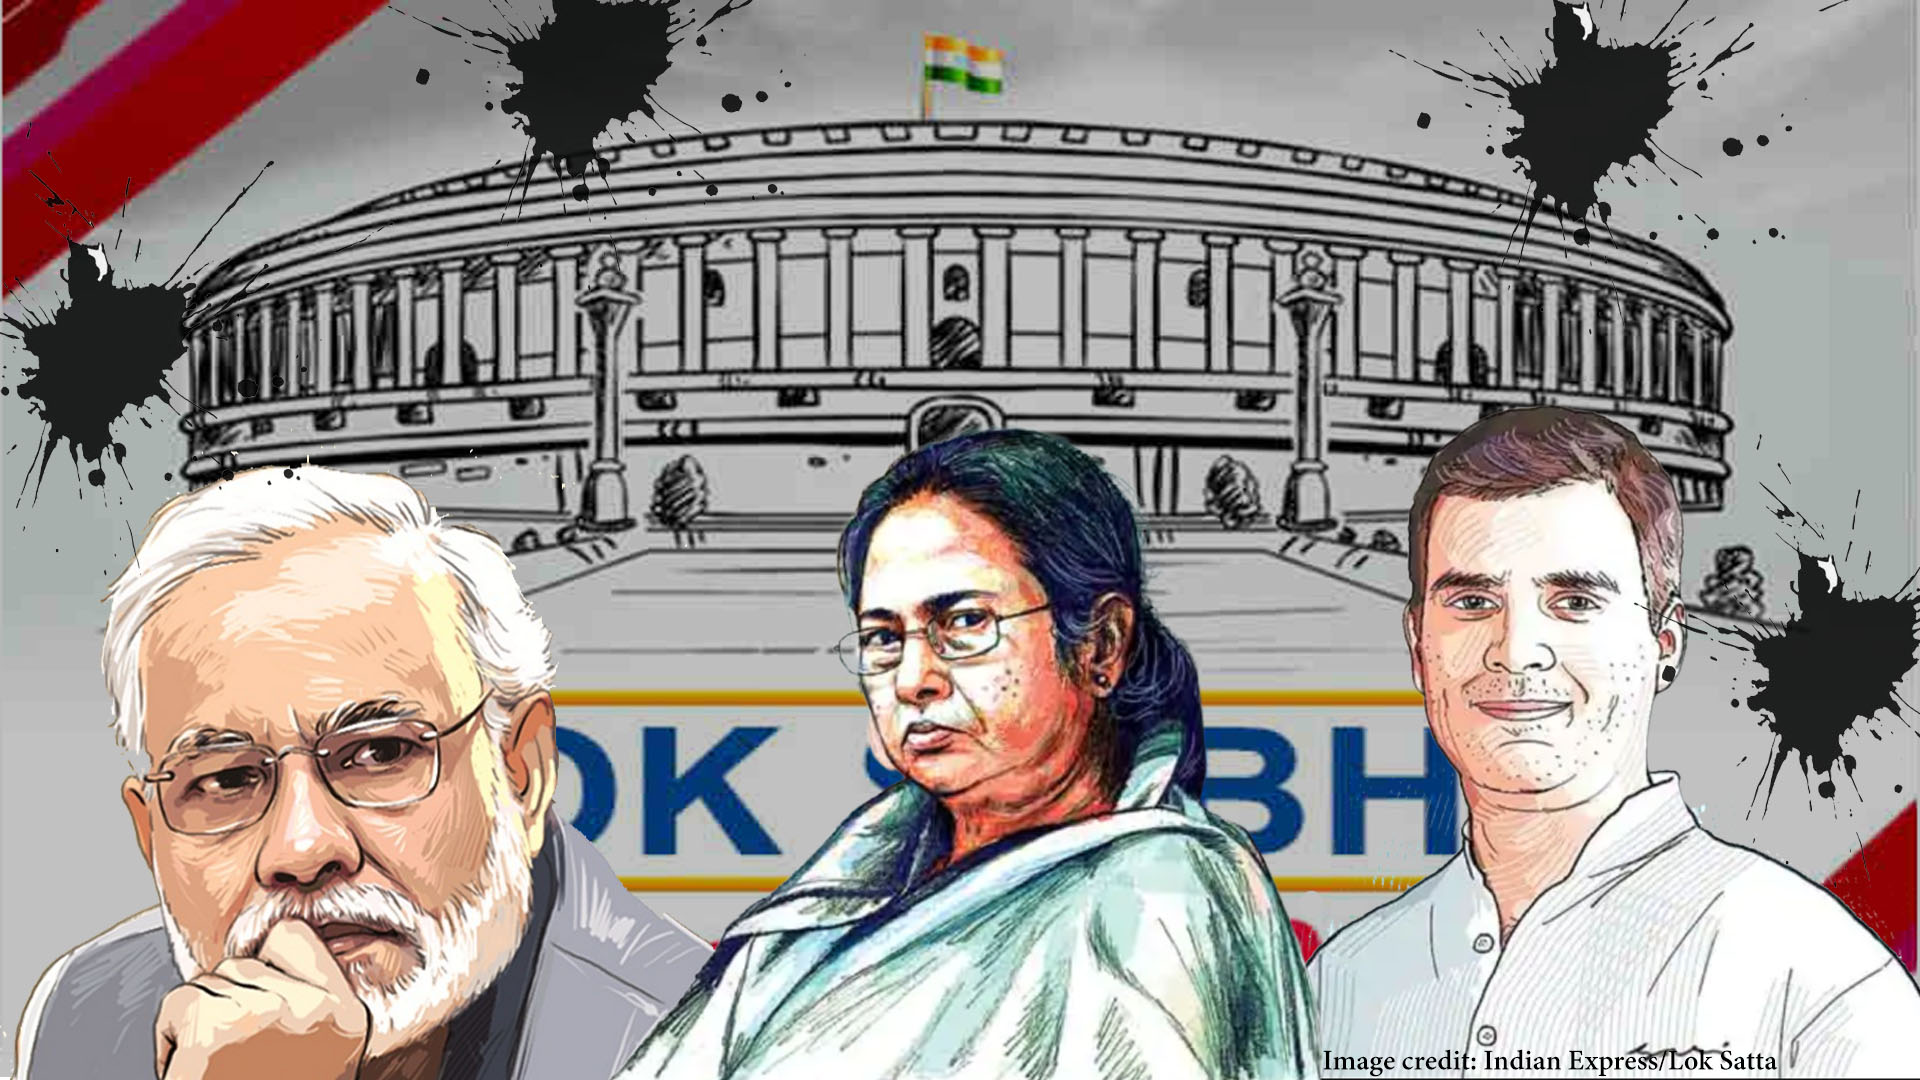 How misinformation was weaponized in 2019 Lok Sabha election - A compilation - Alt News